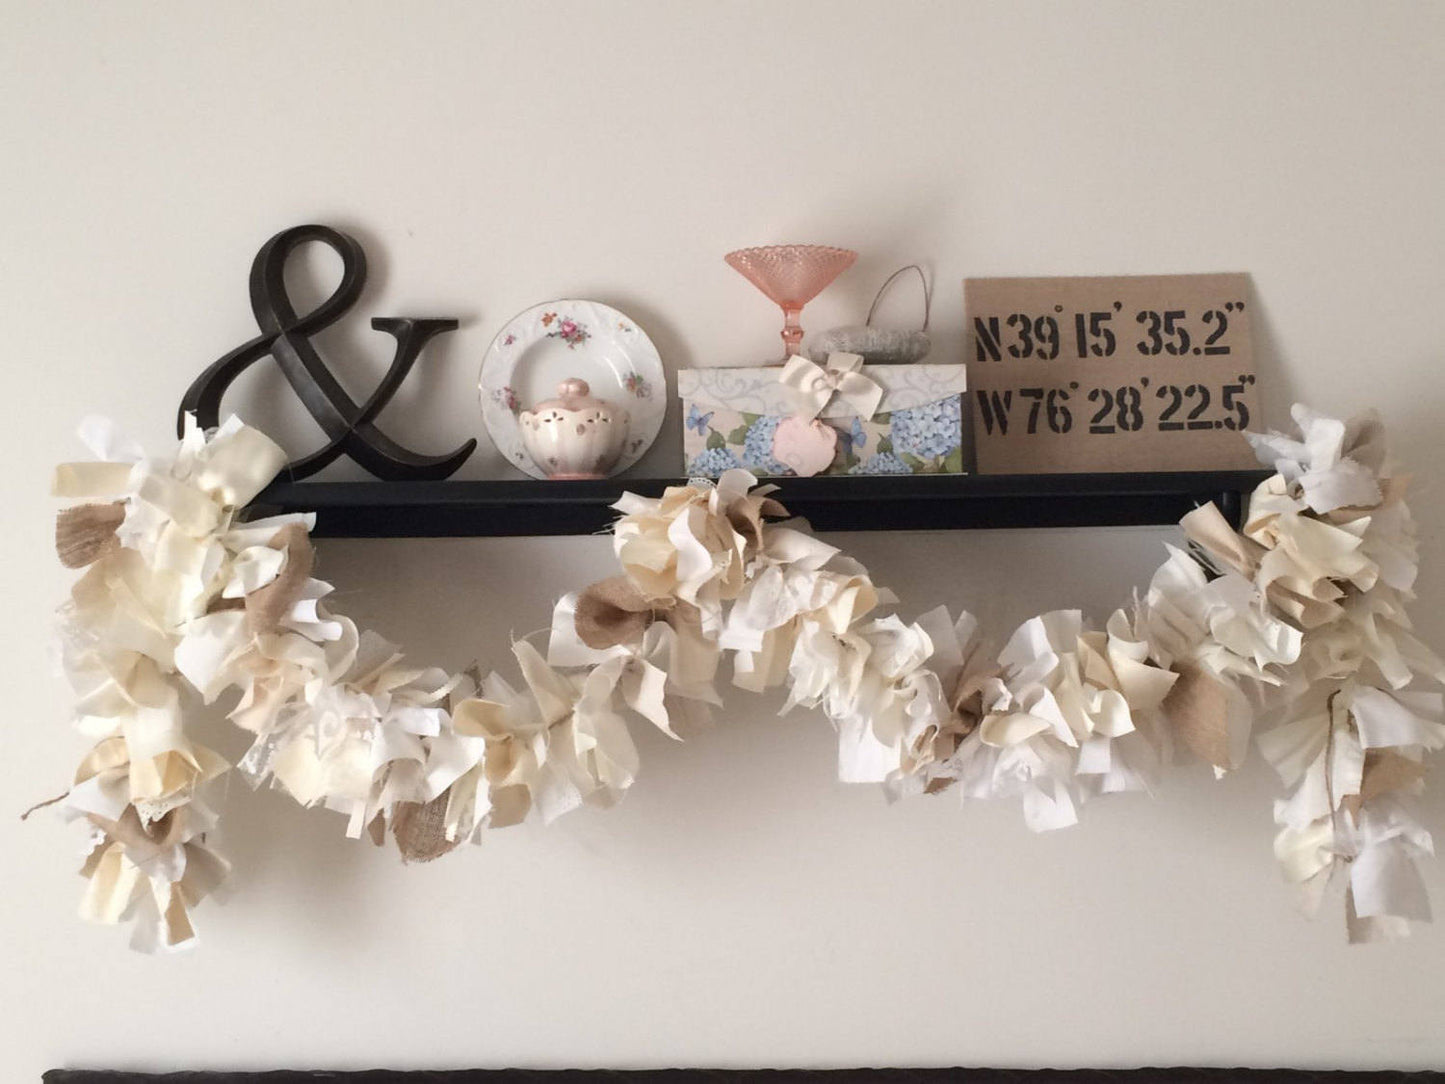 Baby Shower Decoration in Neutral Colors.  Eco-Friendly Burlap and Lace Baby Shower Garland.  Perfect for Elegant Shower. 6-10 Feet Long